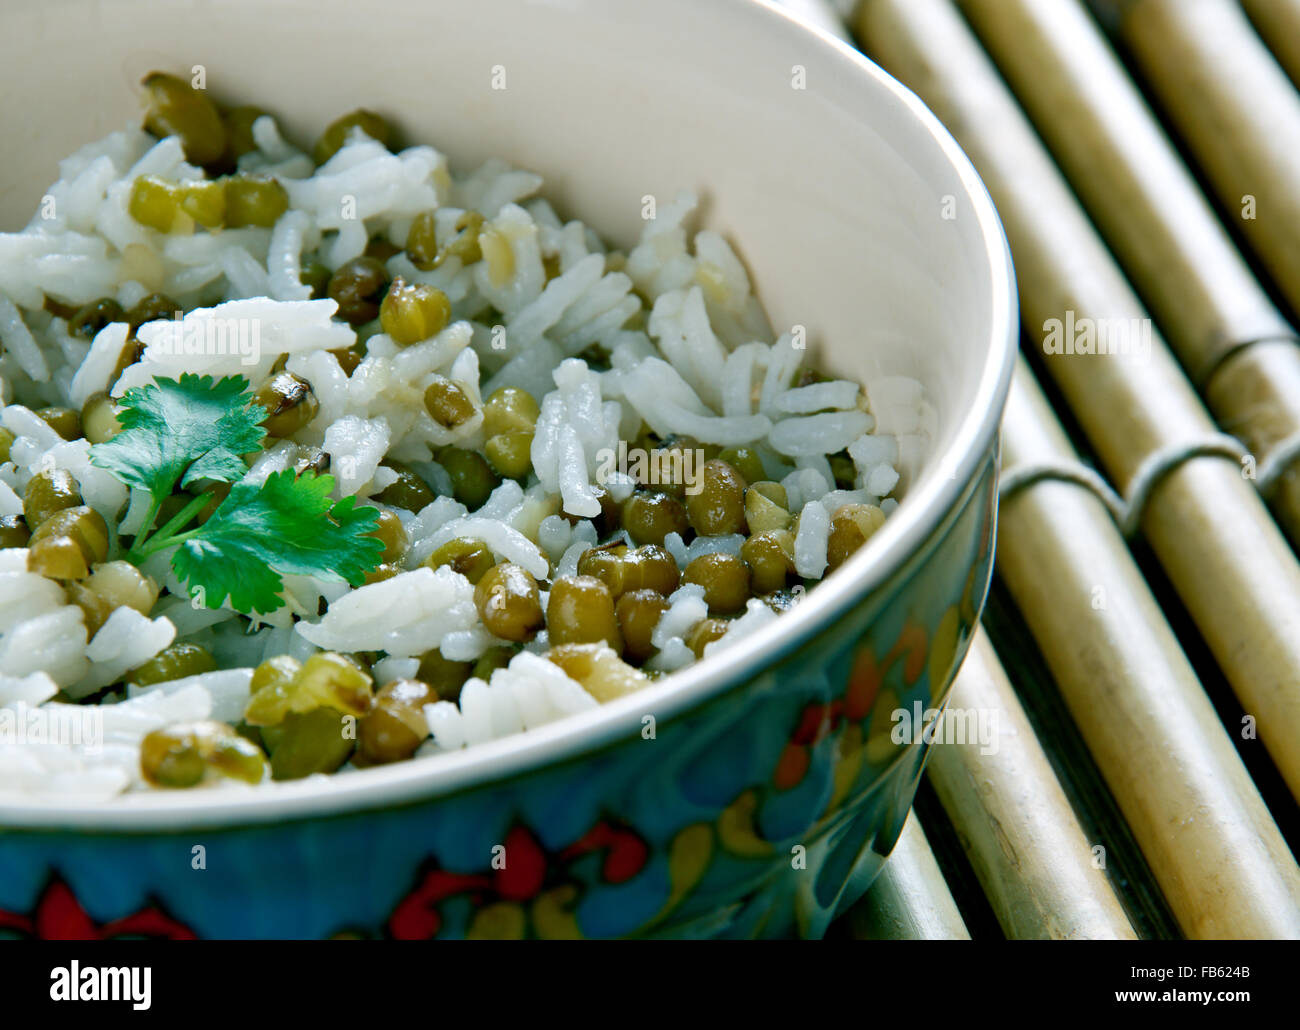 Maash Pulao - mung bean with rice.Afghan Cuisine. Stock Photo